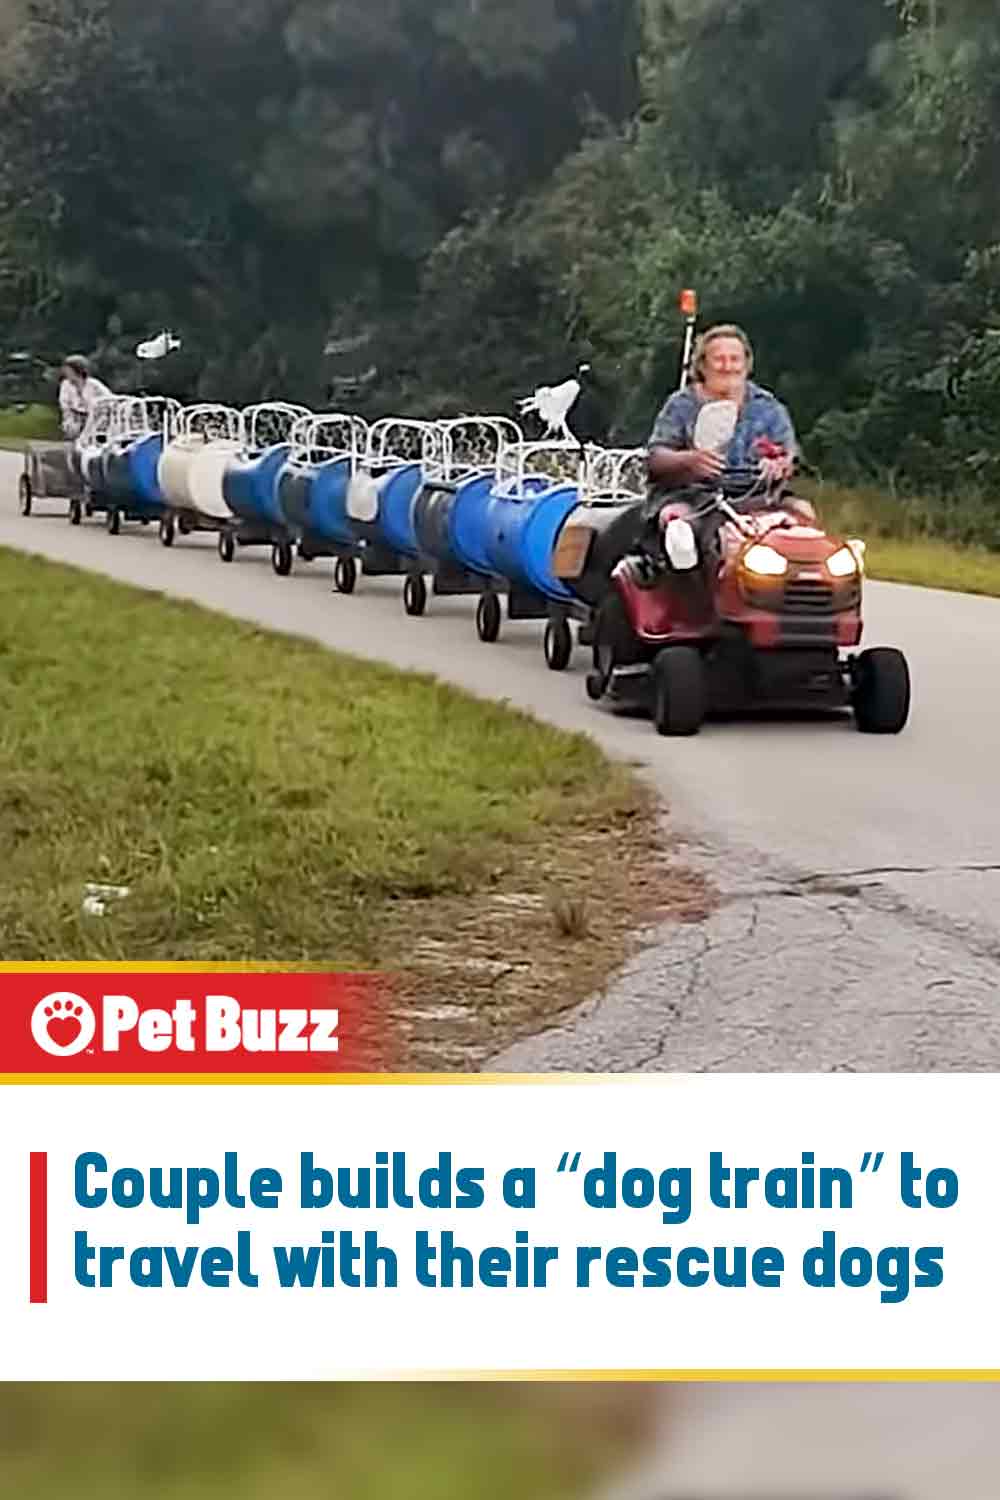 Couple builds a “dog train” to travel with their rescue dogs